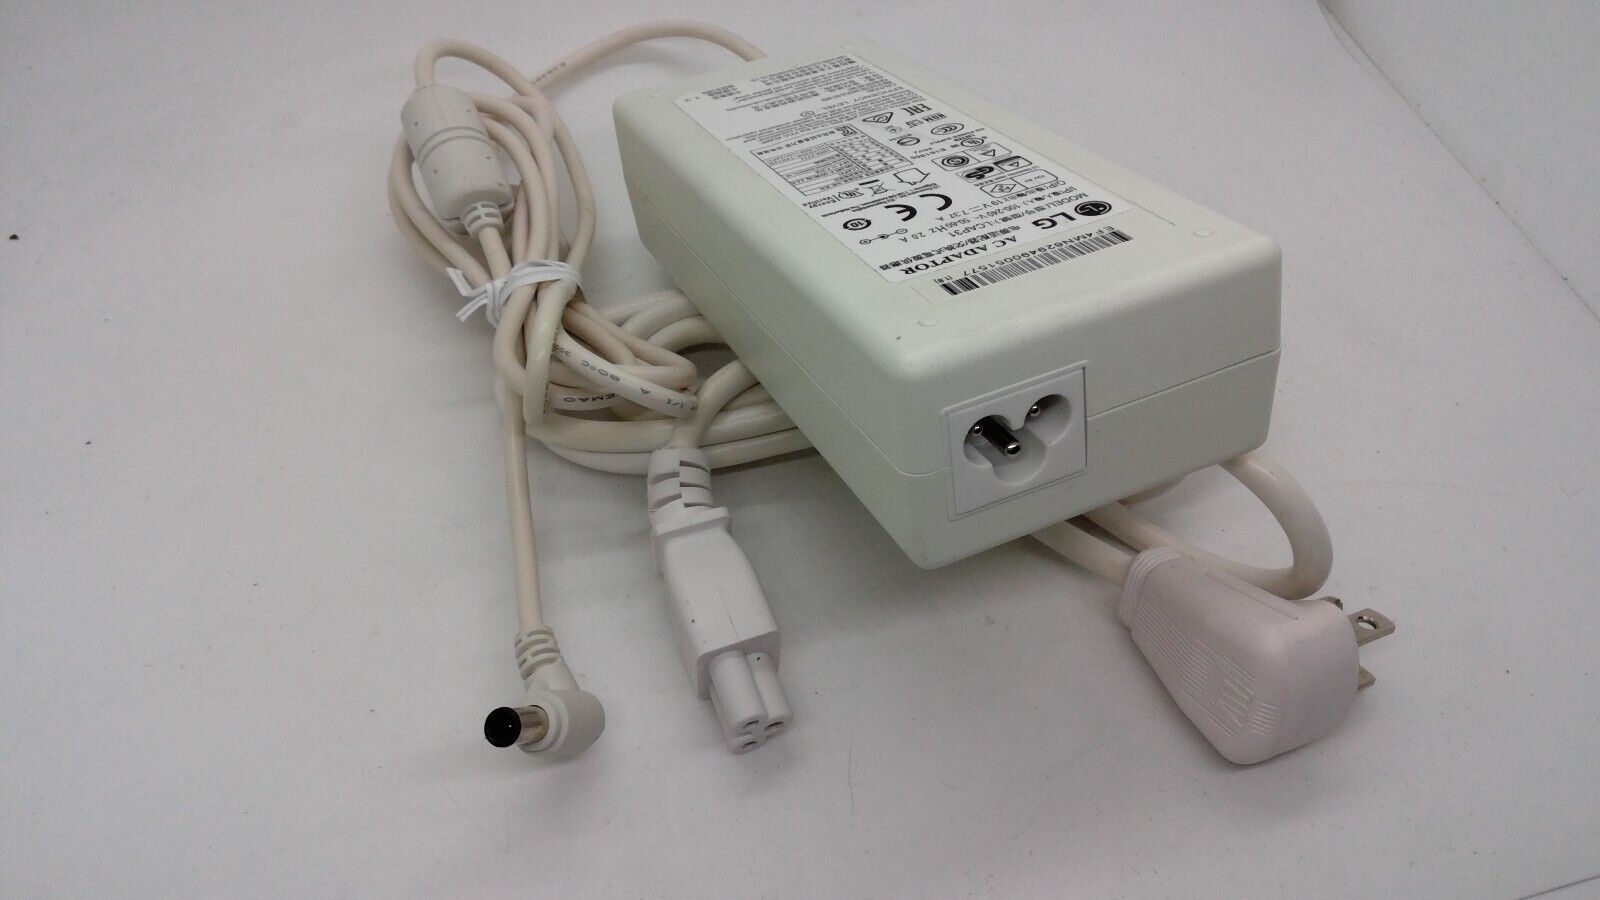 OEM LG 19V 7.37A LCAP31 AC Adapter for LG 32MU89 34UC97C 34UM95 34UC87M Monitor Compatible Brand For LG Compatible Prod